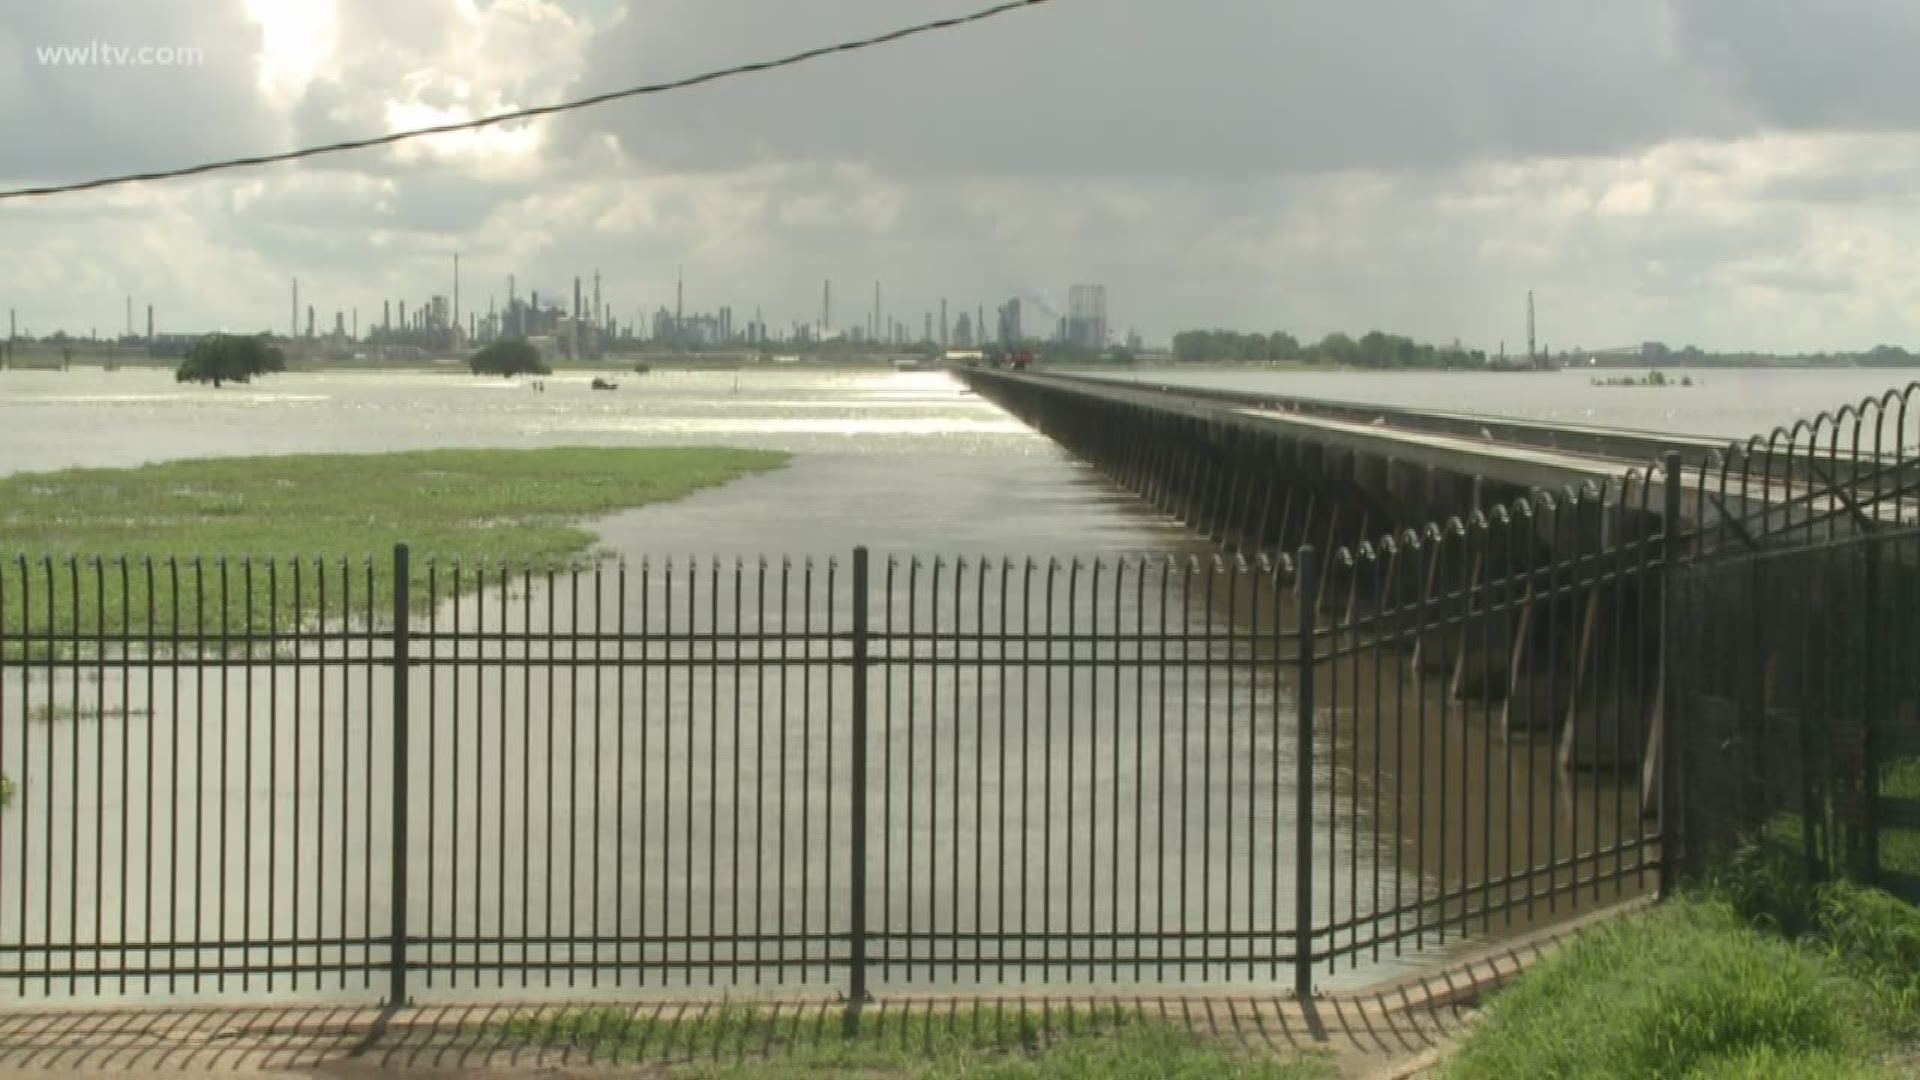 The historic high water flow on the Mississippi River that forced a second opening of the Bonnet Carre Spillway in May is finally starting to recede.